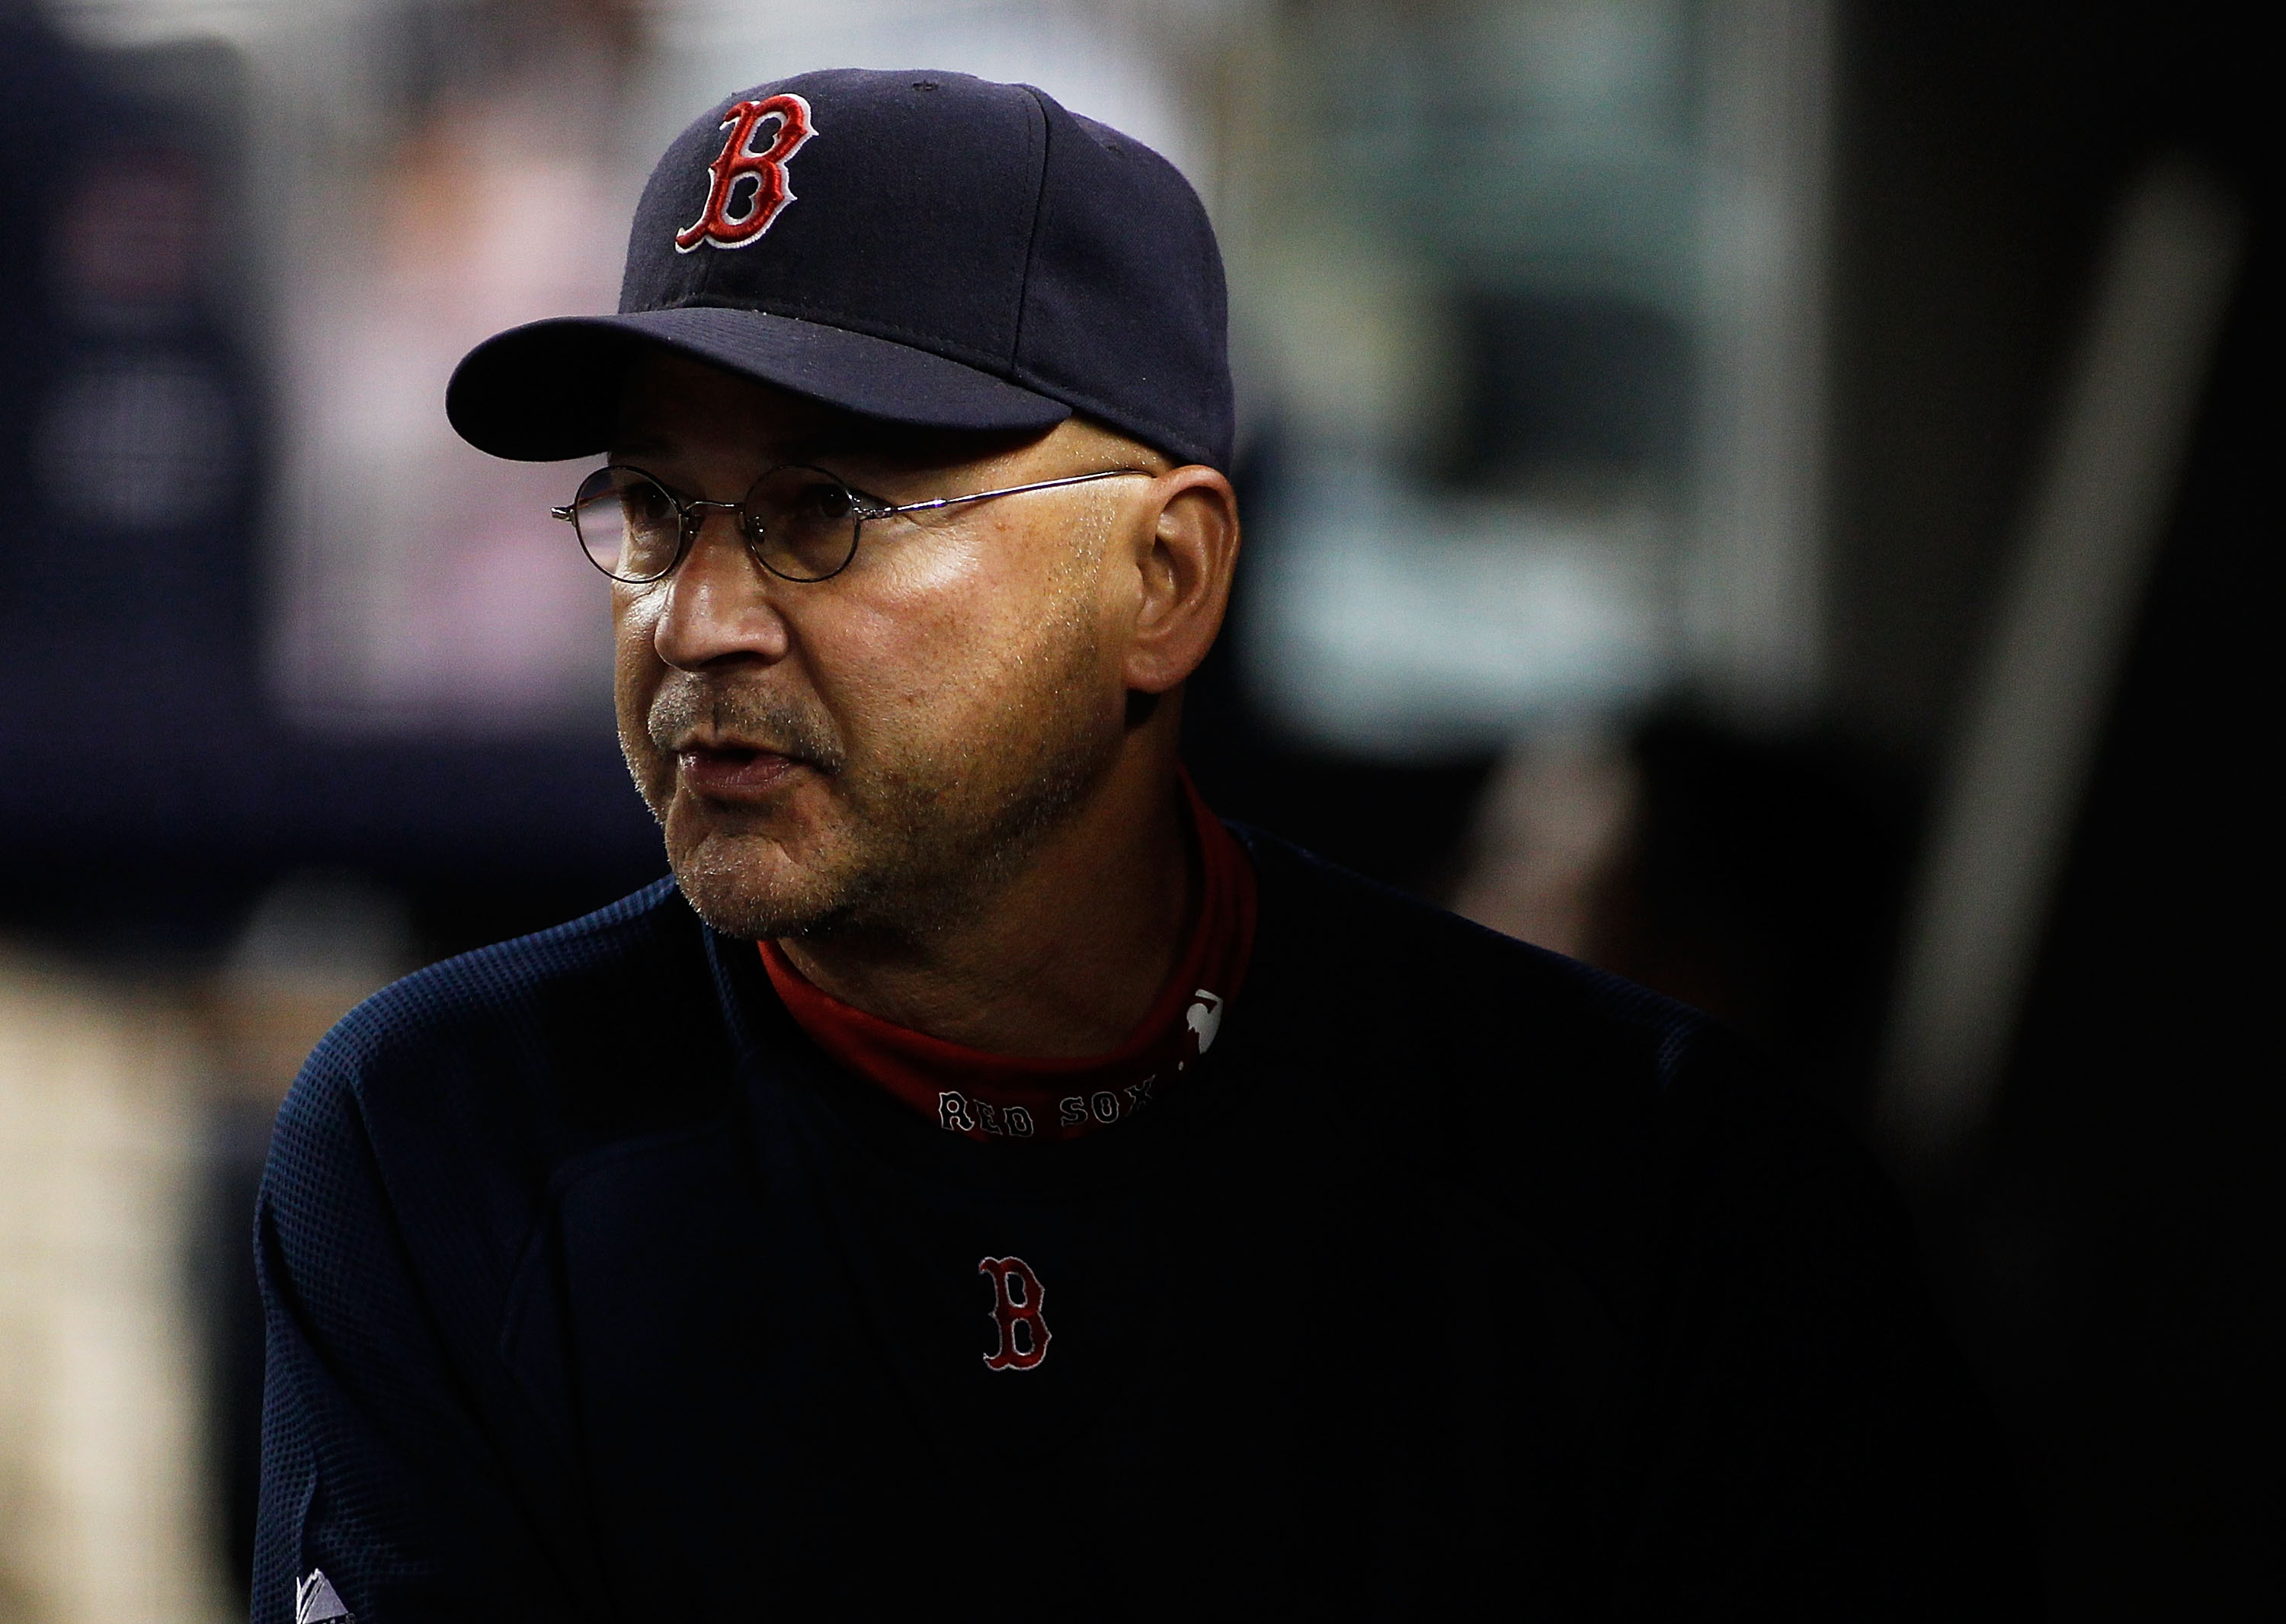 NEW YORK - SEPTEMBER 26:  Manager Terry Francona #47 of the Boston Red Sox looks on prior to their game against the New York Yankees on September 26, 2010 at Yankee Stadium in the Bronx borough of New York City.  (Photo by Mike Stobe/Getty Images)